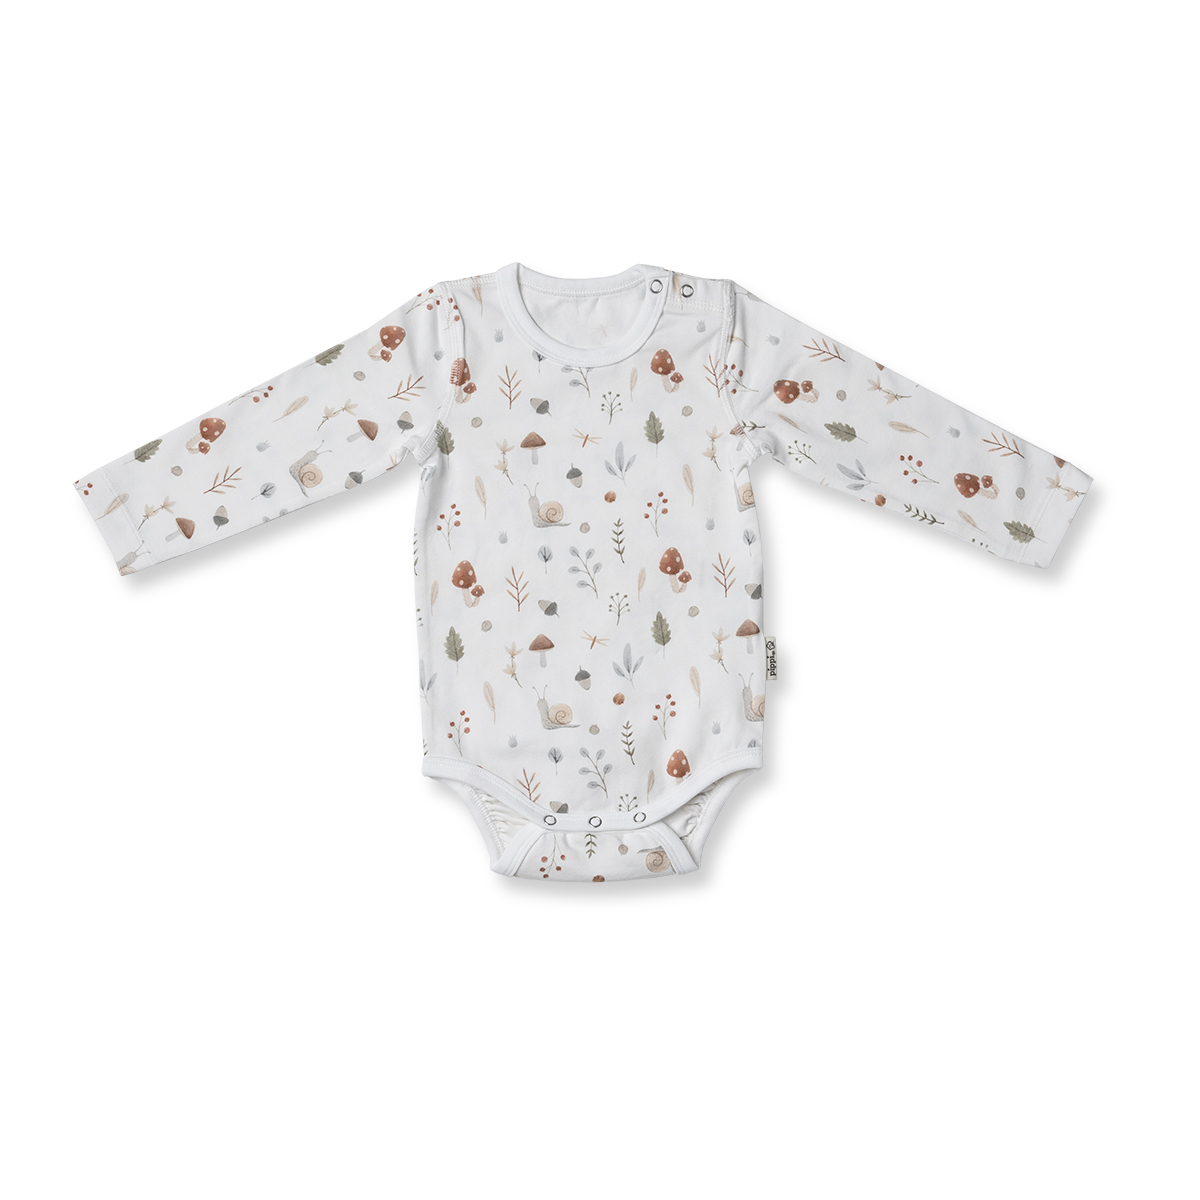 White bodysuit with long sleeves and mushroom forest pattern.